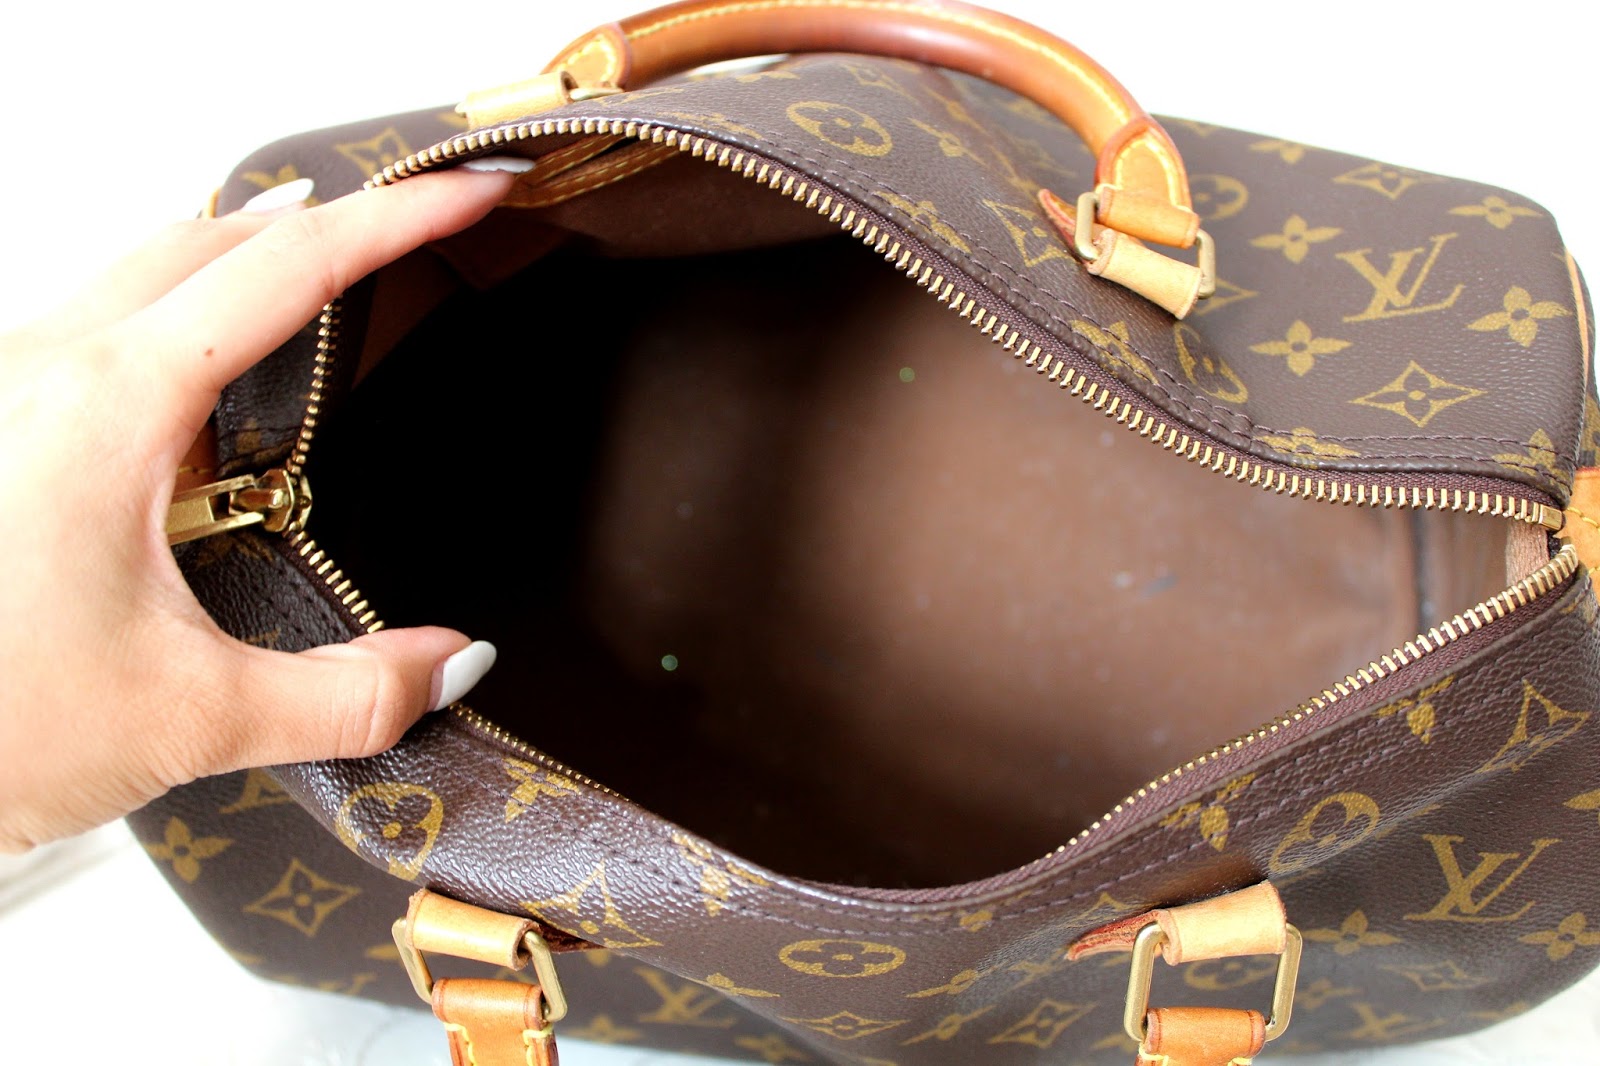 Review: Louis Vuitton Speedy 30 - late night minutes